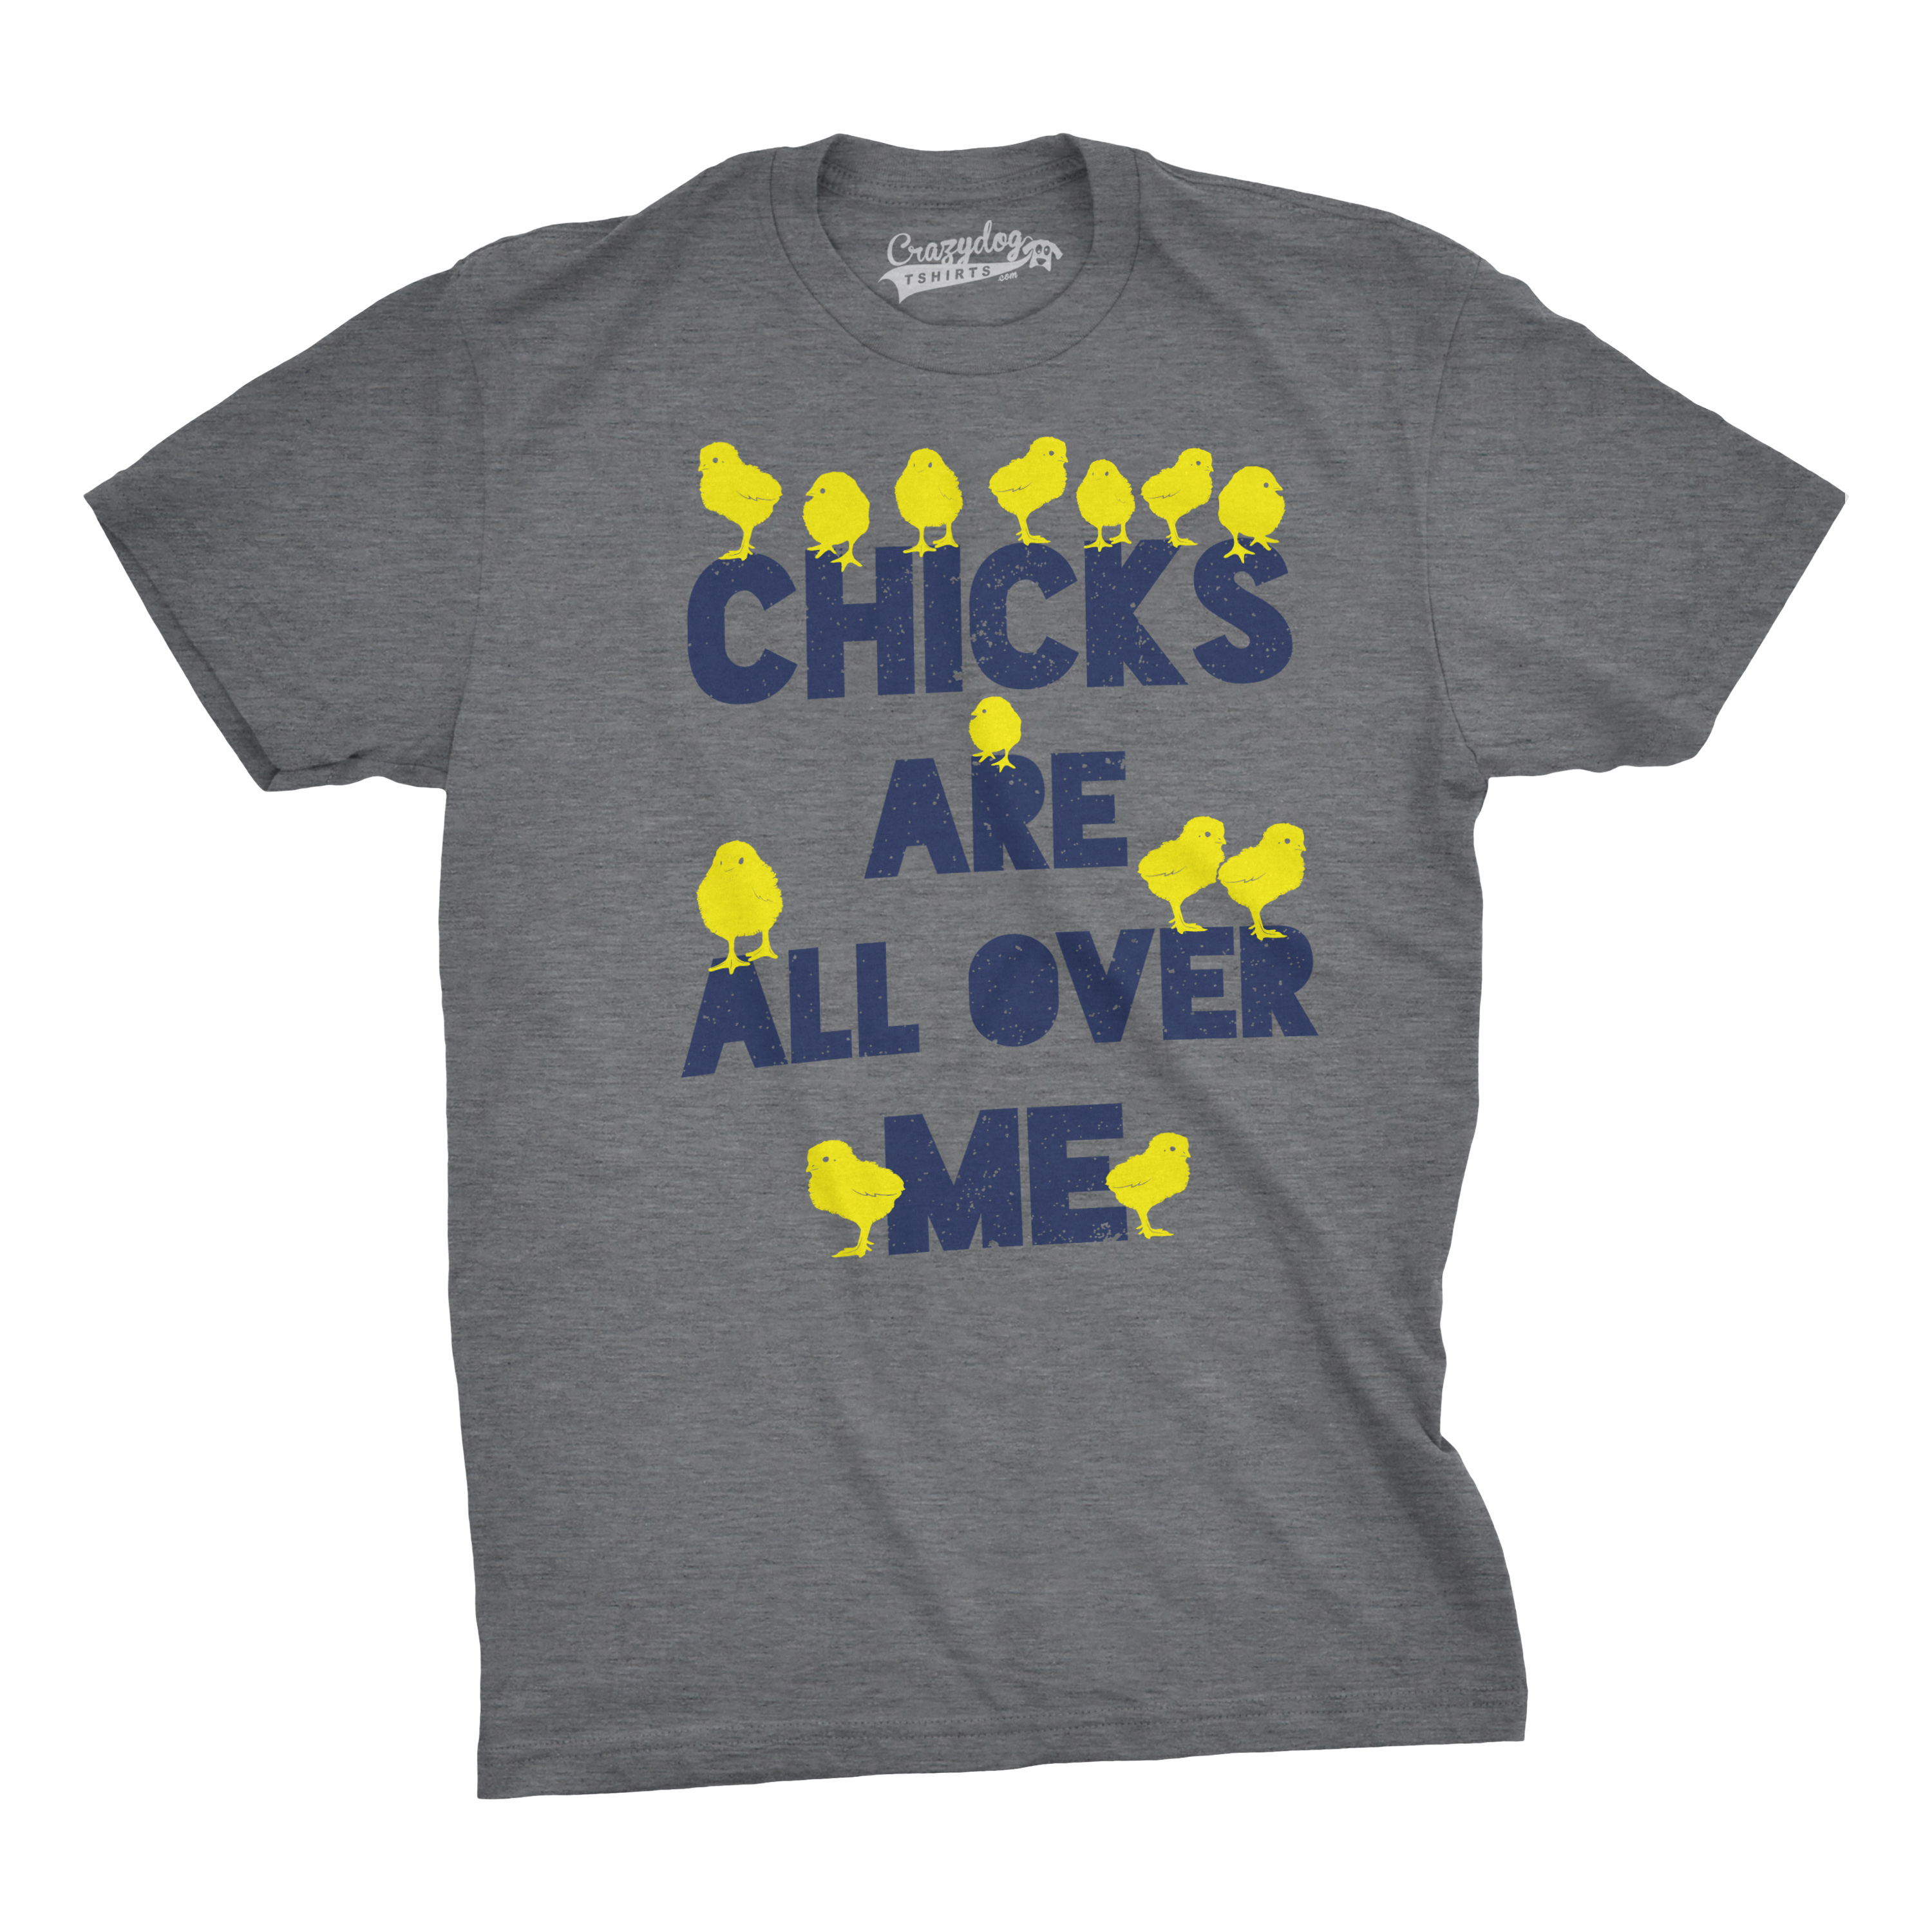 Crazy Dog Tshirts Mens Chicks Are All Over Me Funny Easter T Shirt Sarcastic Chicken Egg Tee